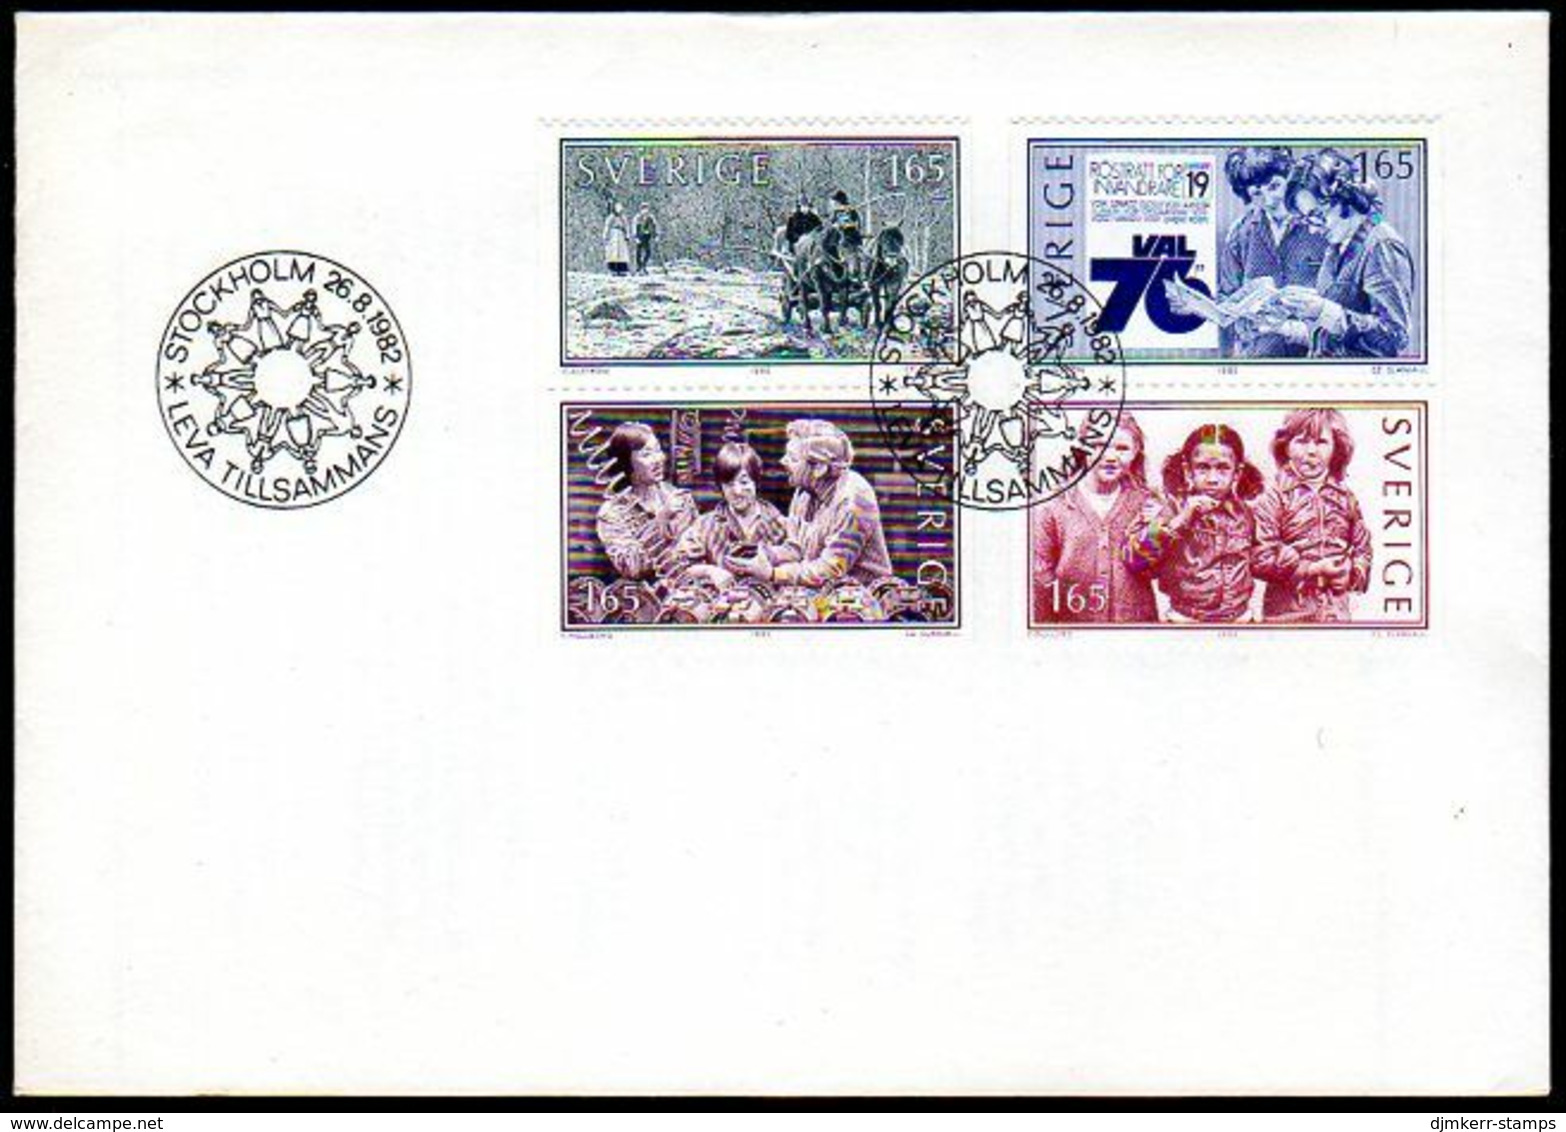 SWEDEN 1982 Immigrants In Sweden FDC. Michel 1201-04 - FDC